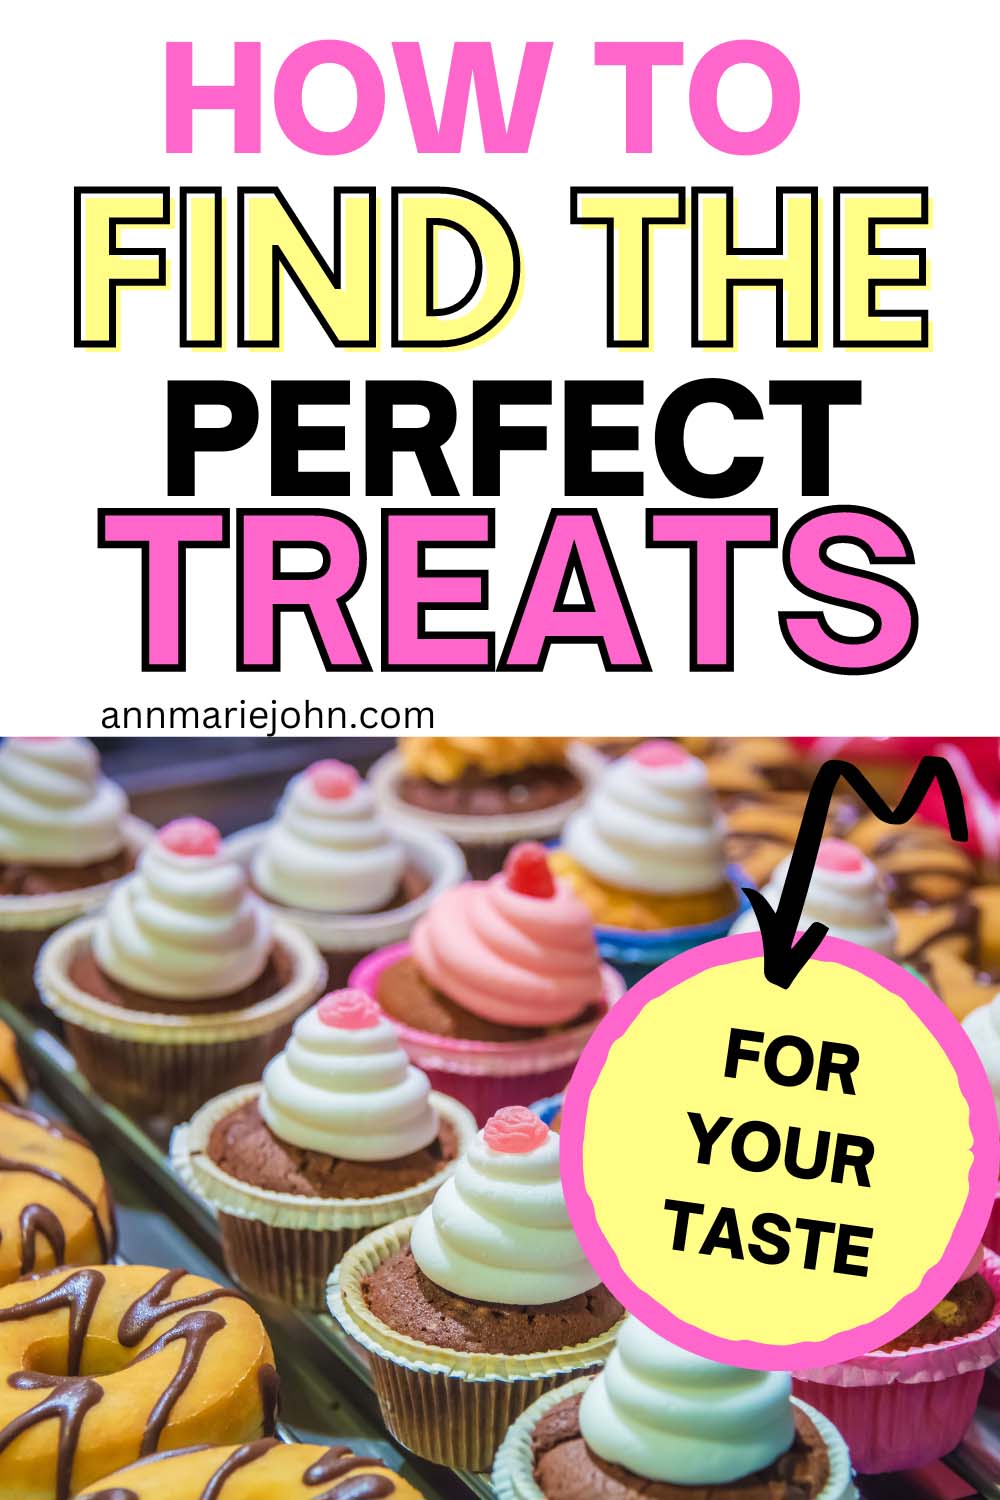 How To Find The Perfect Treats